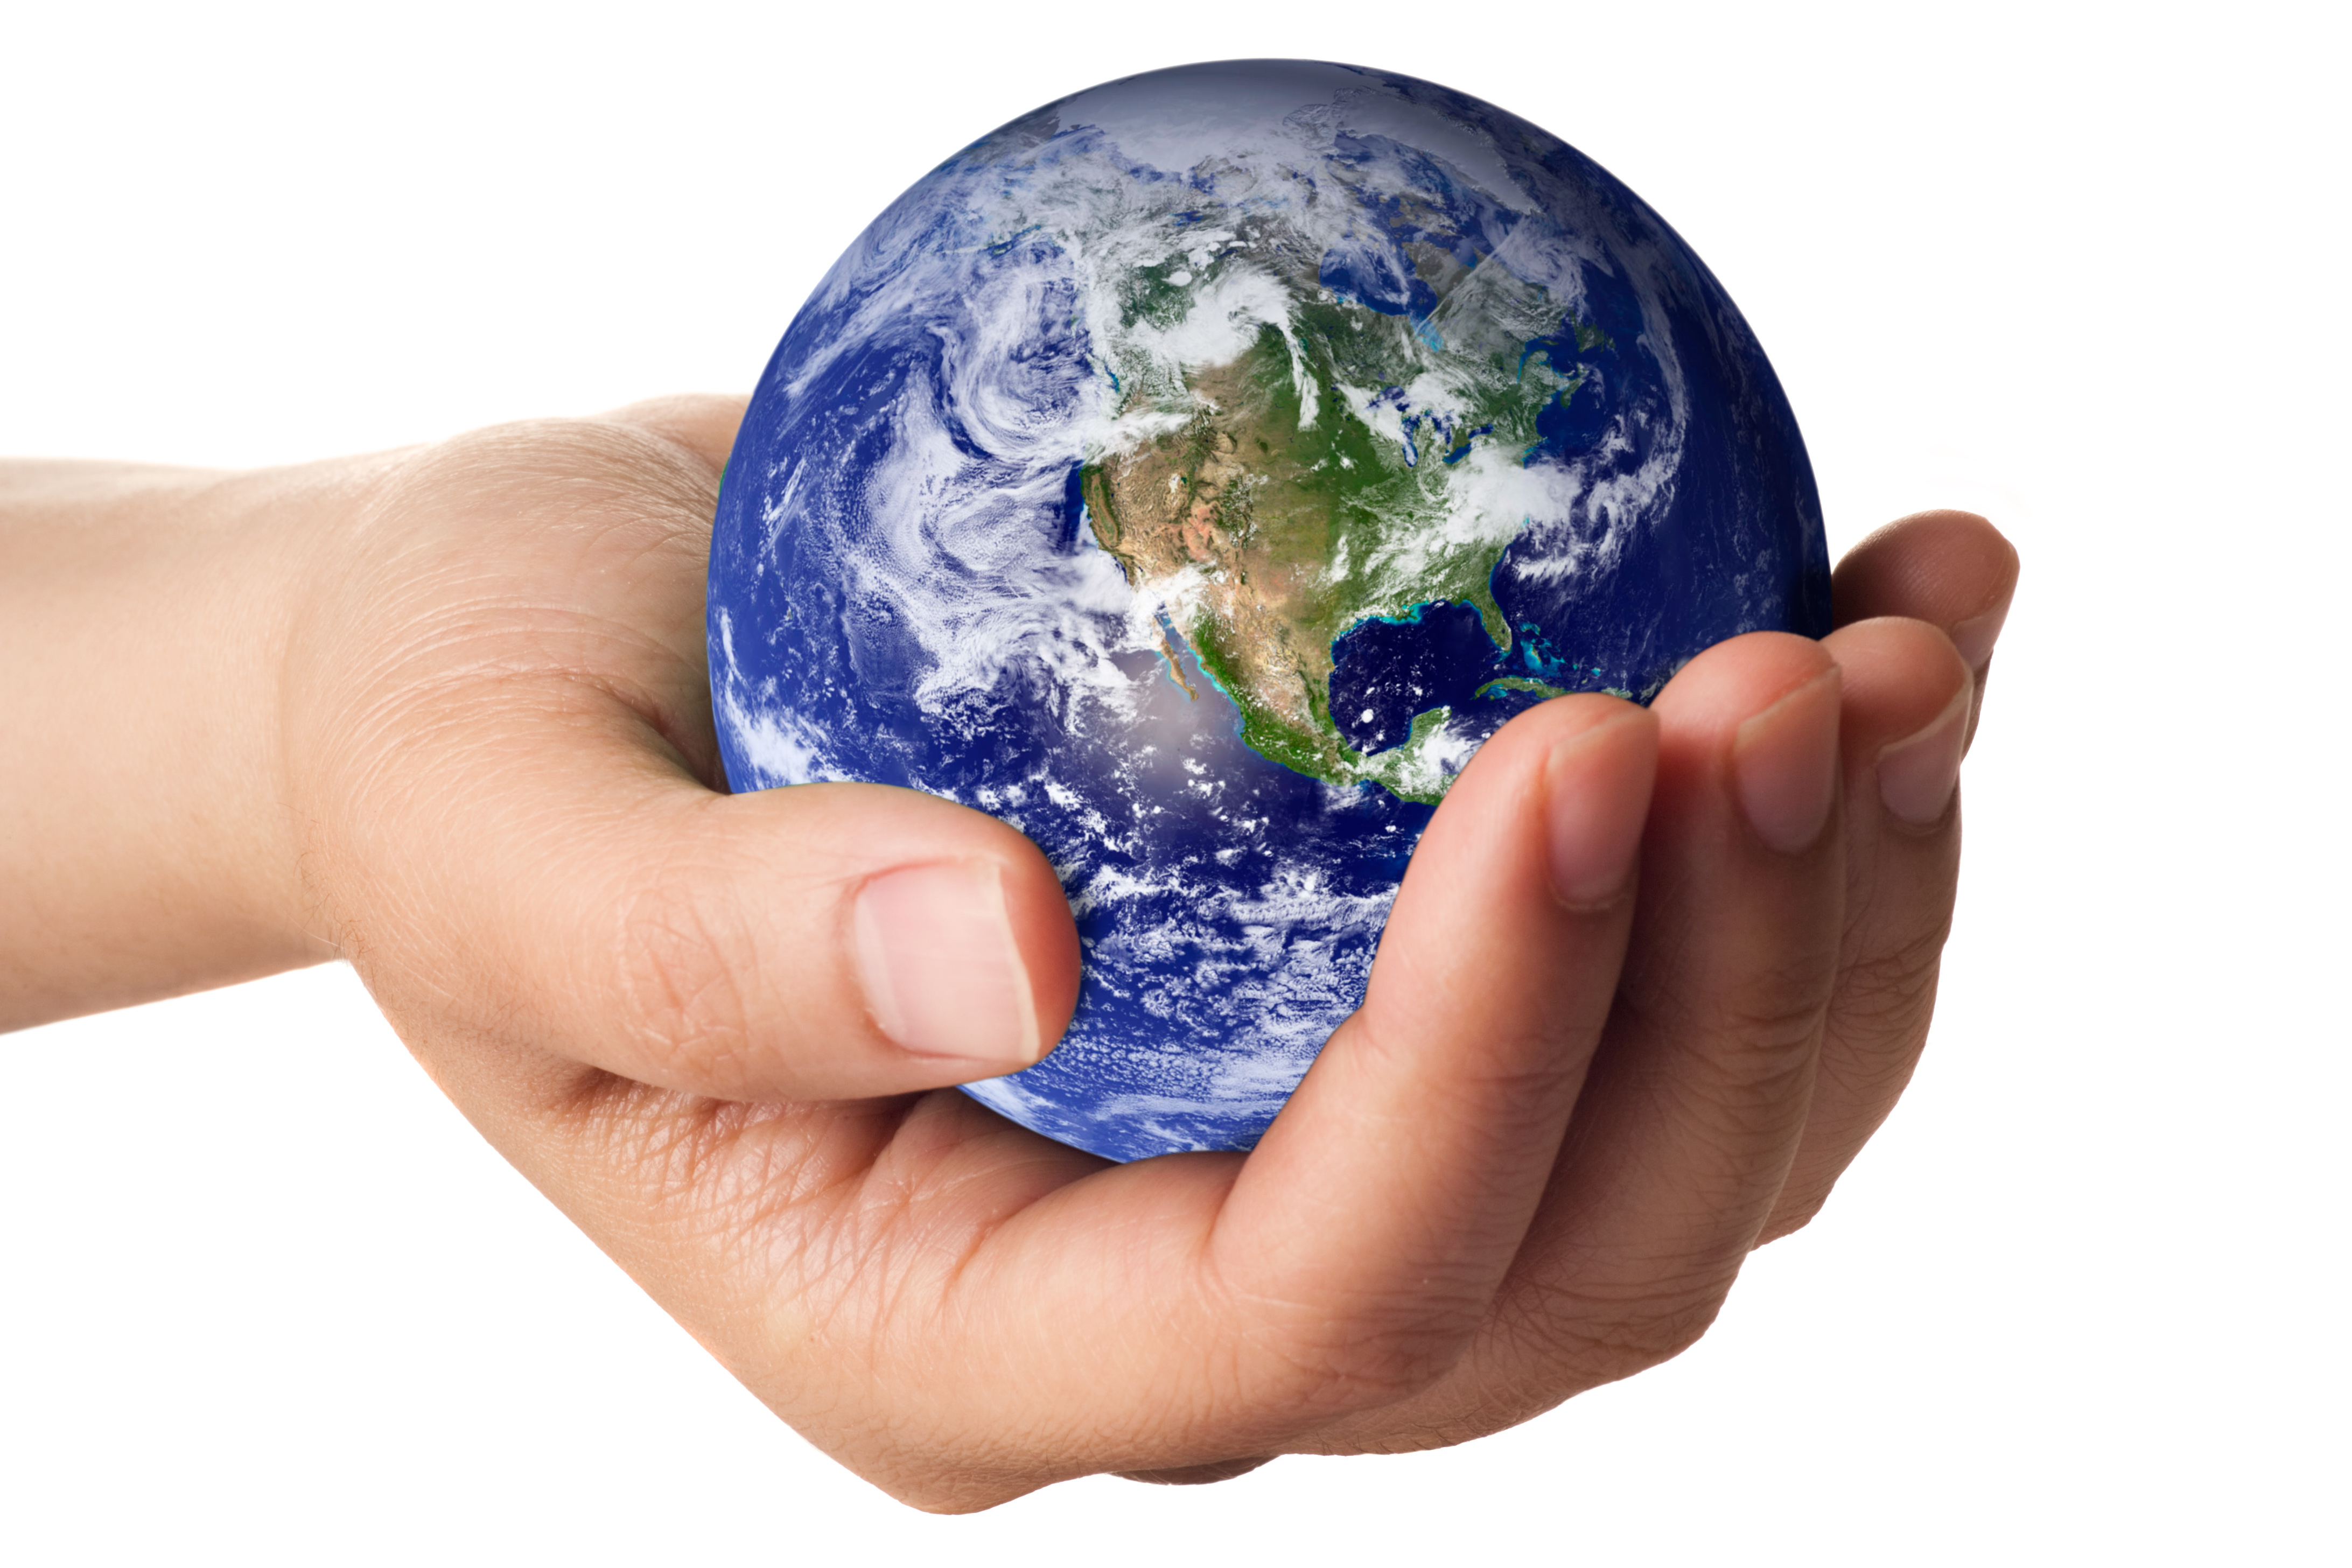 "A hand holding the earth showing north america, isolated on white.  Earth image courtesy of NASA http://visibleearth.nasa.gov/"